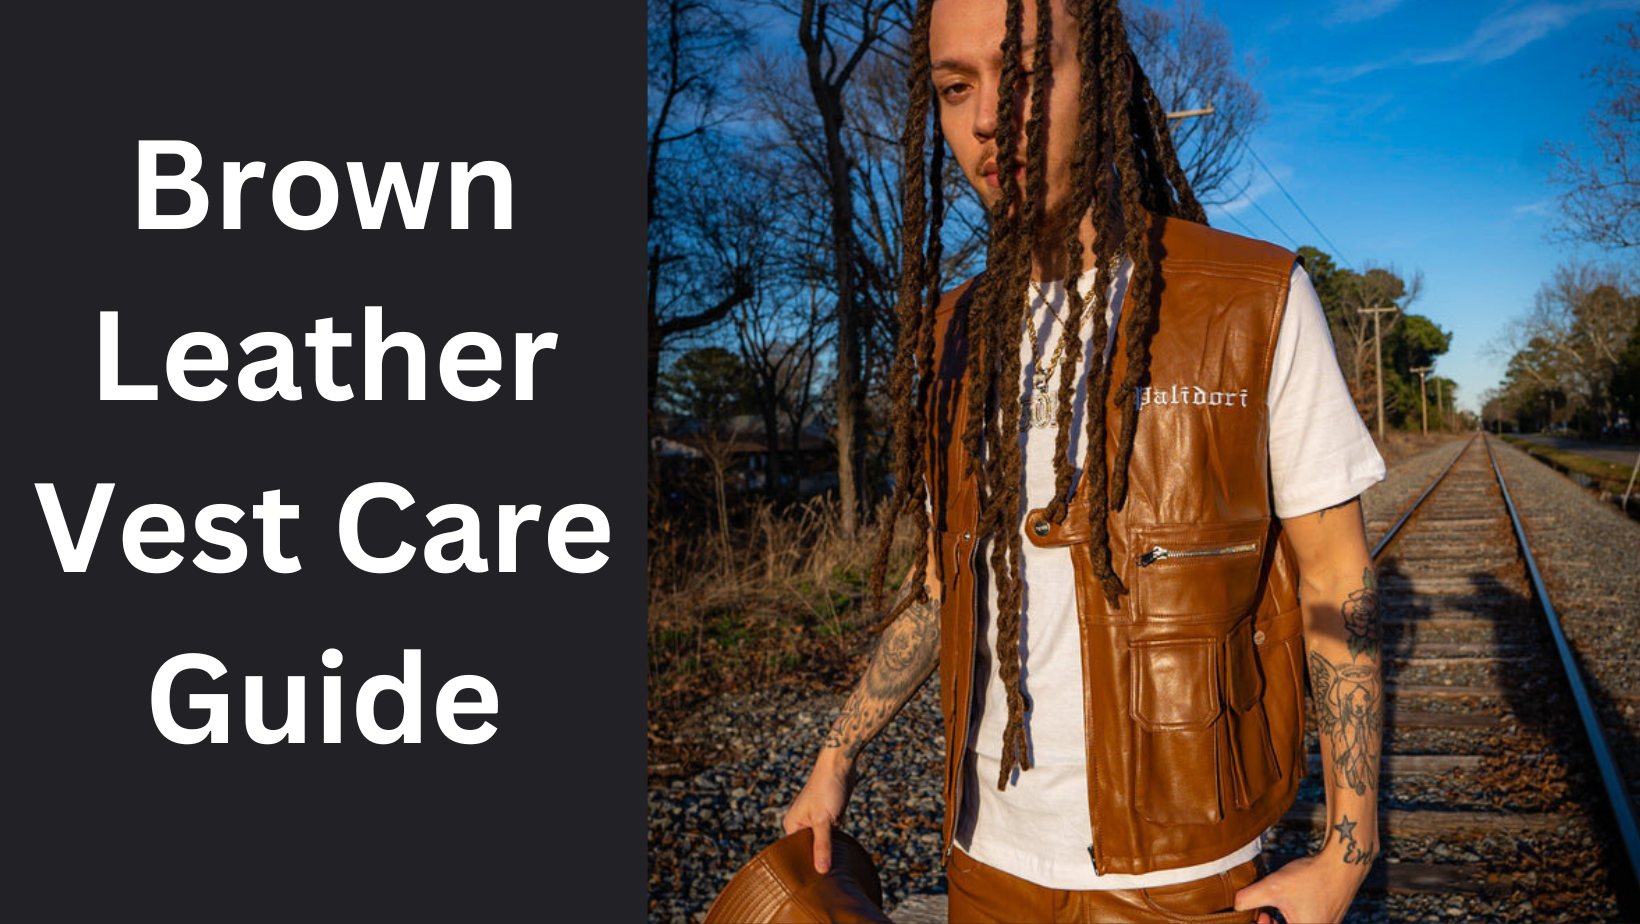 Brown Leather Vest Care Guide